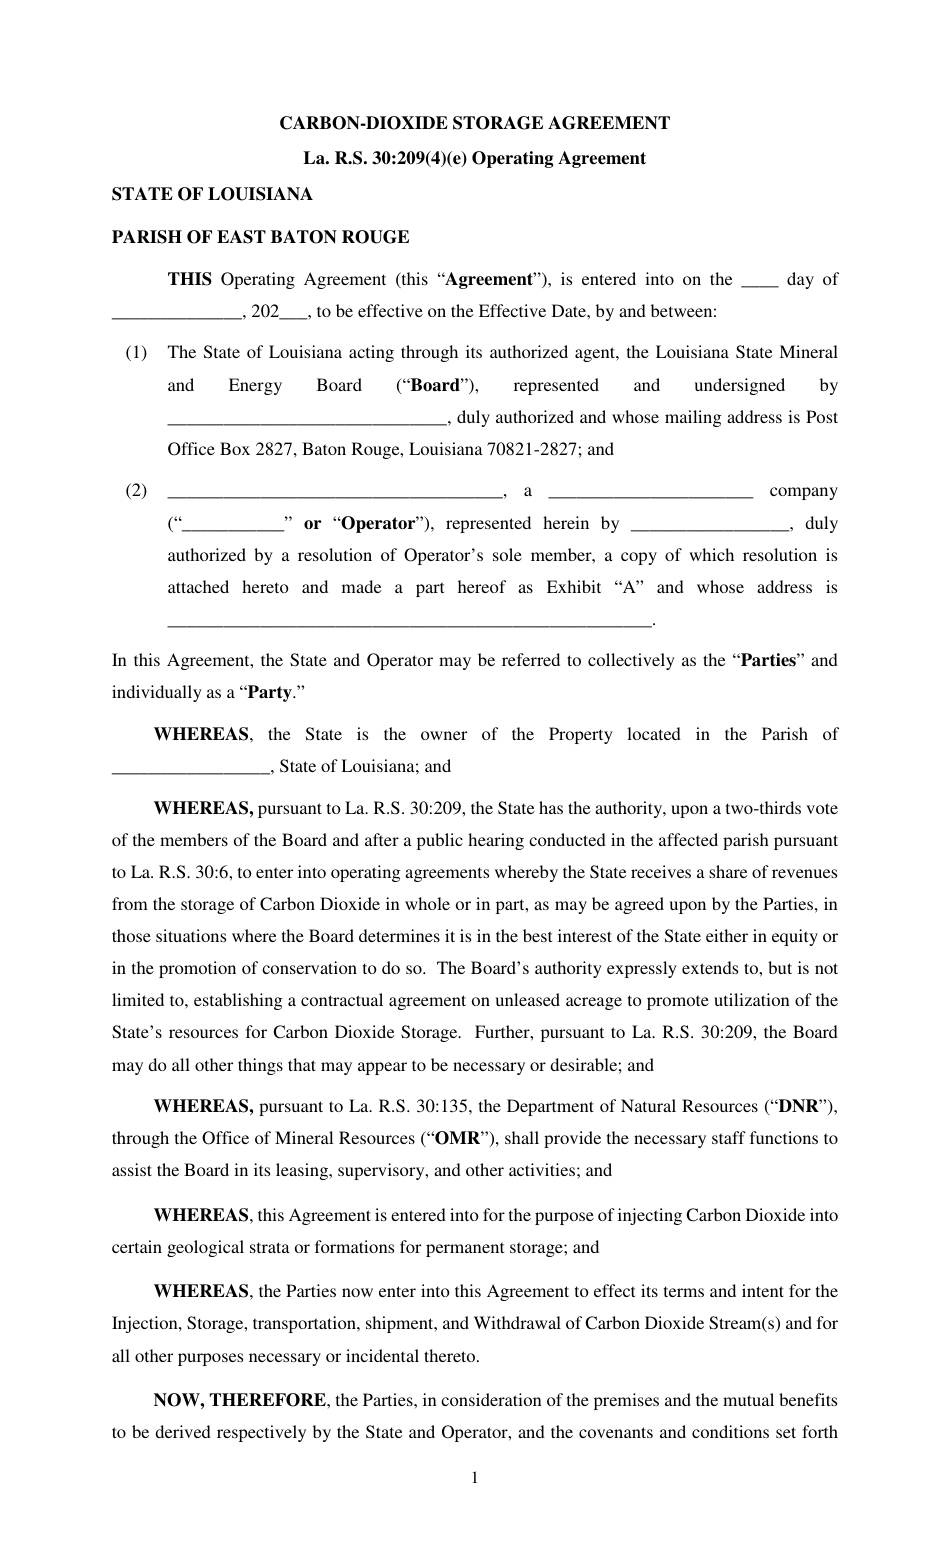 Carbon-Dioxide Storage Agreement - Louisiana, Page 1